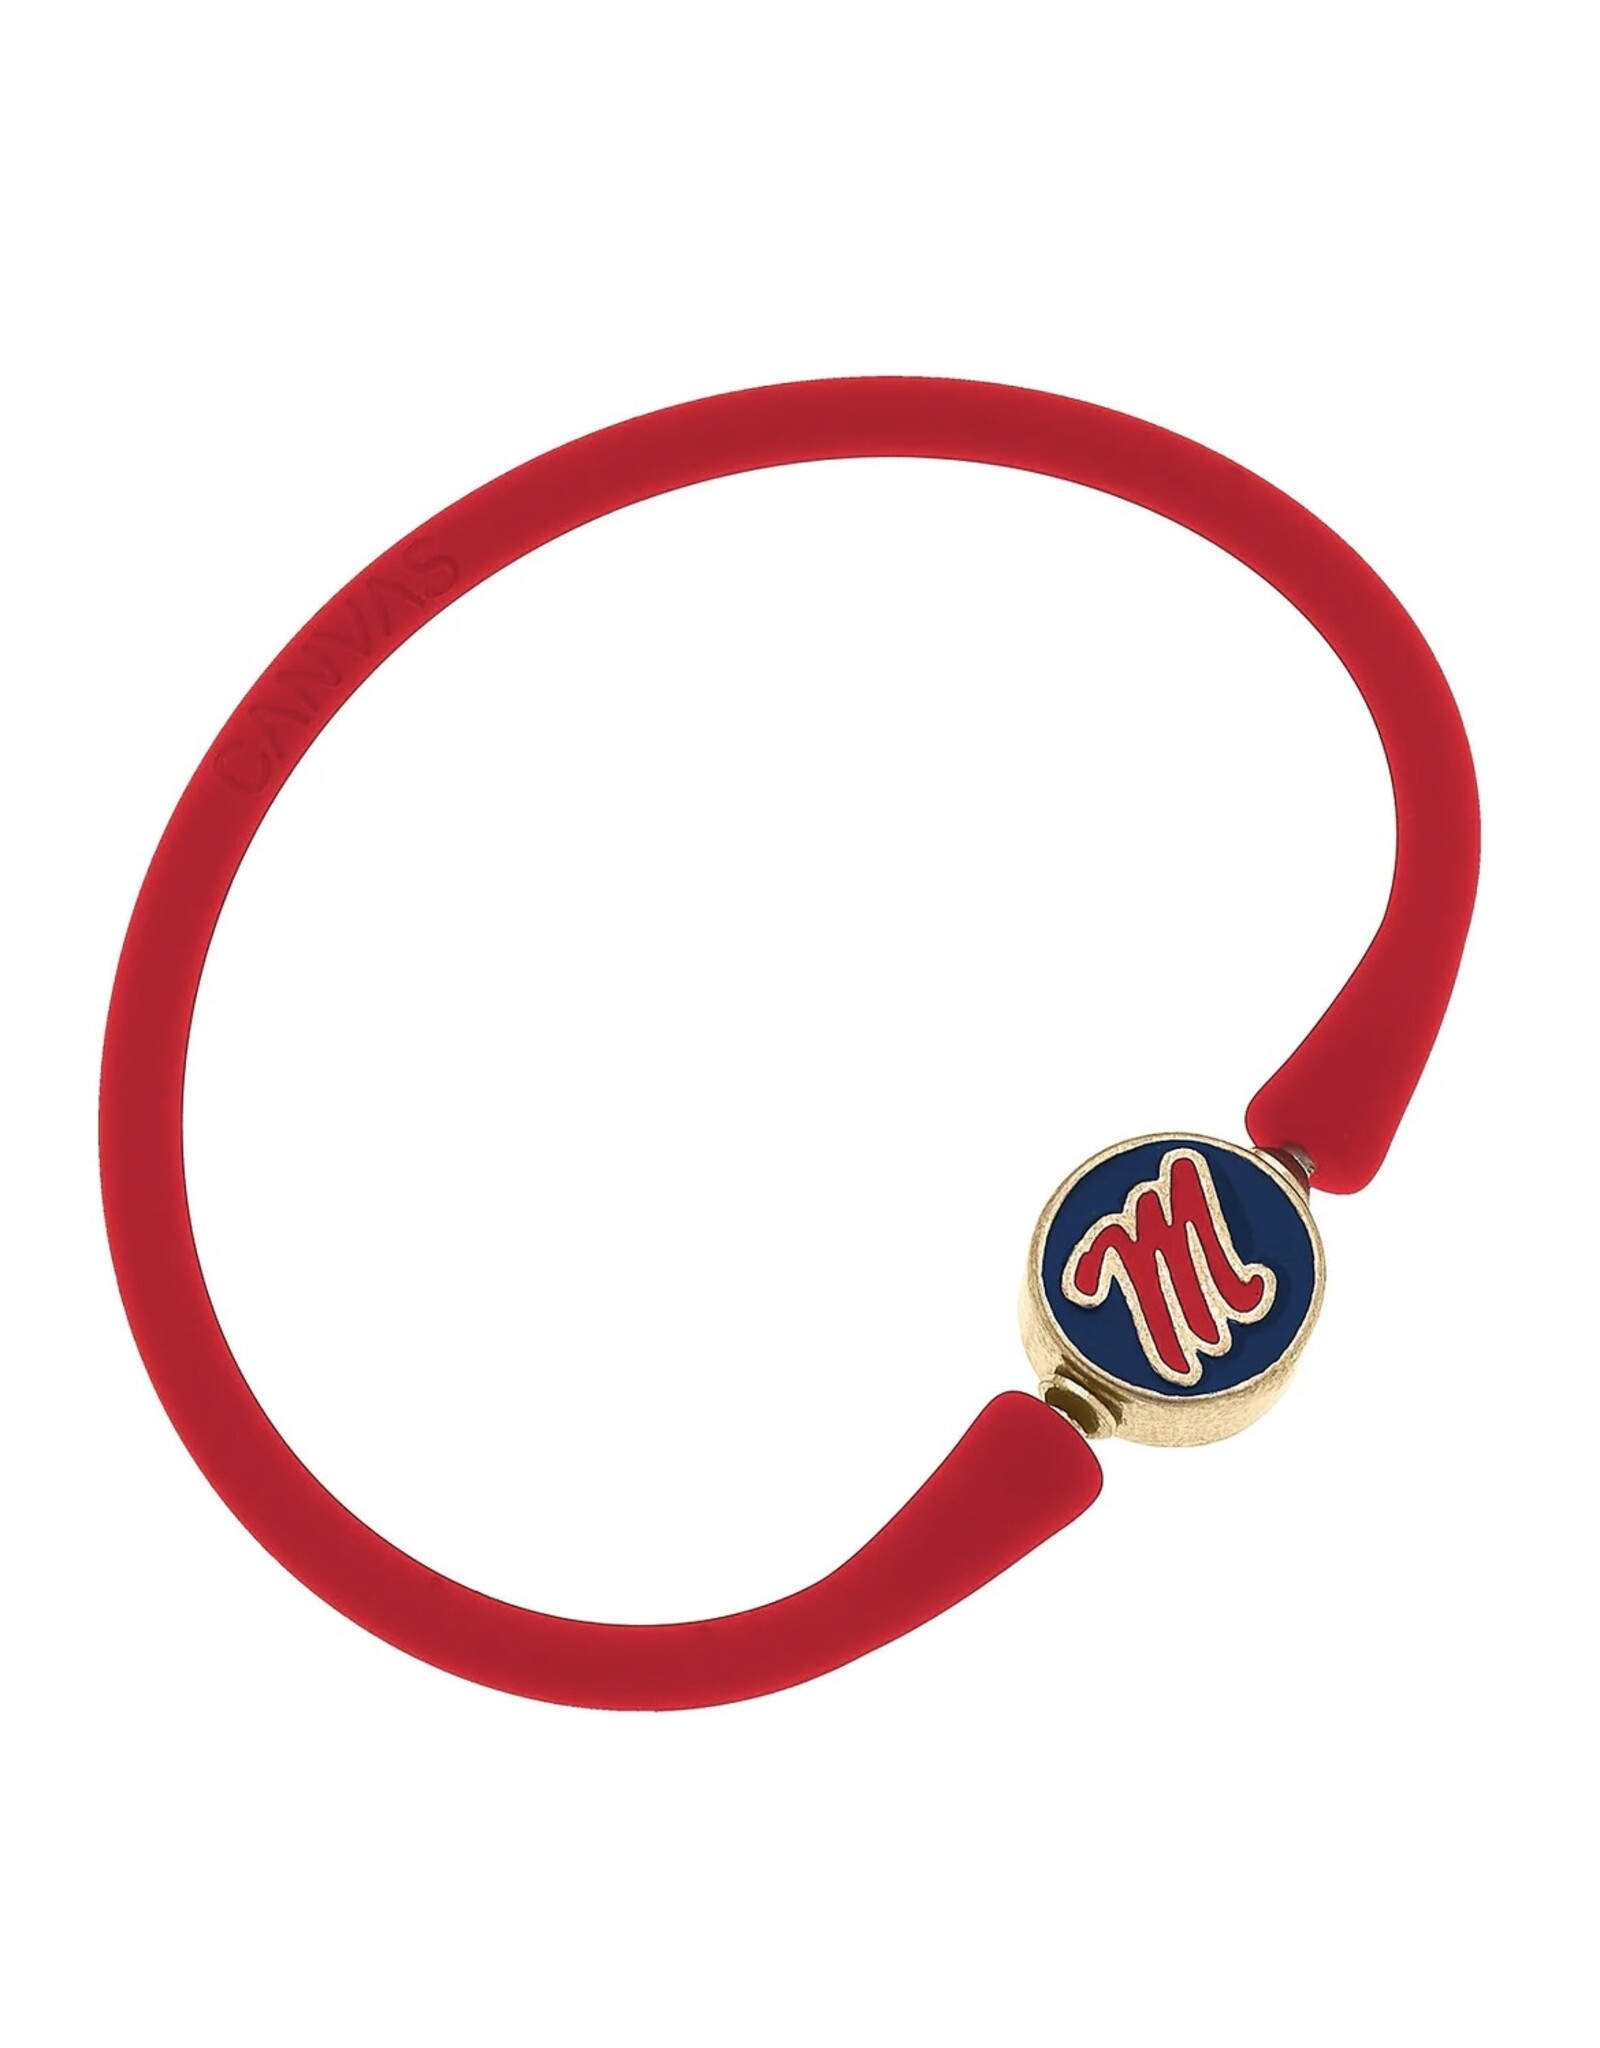 23131B-MS-RD] Ole Bracelet the - Silicone of Enamel Heart Miss Rebels South Bali in Red